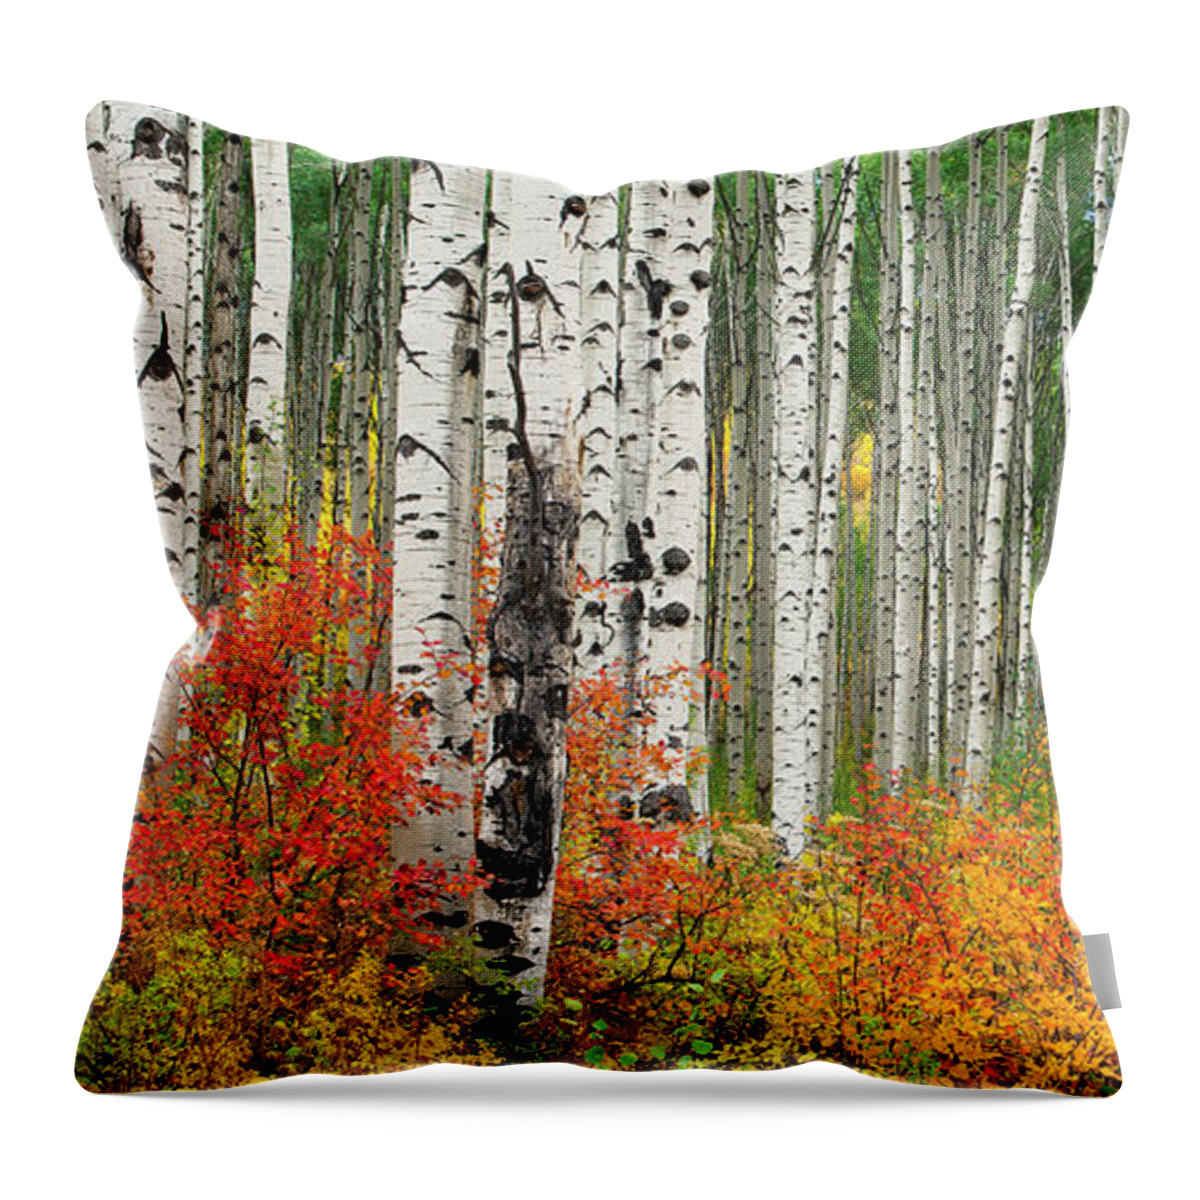 Aspens Throw Pillow featuring the photograph In The Aspen Forest by Tim Reaves